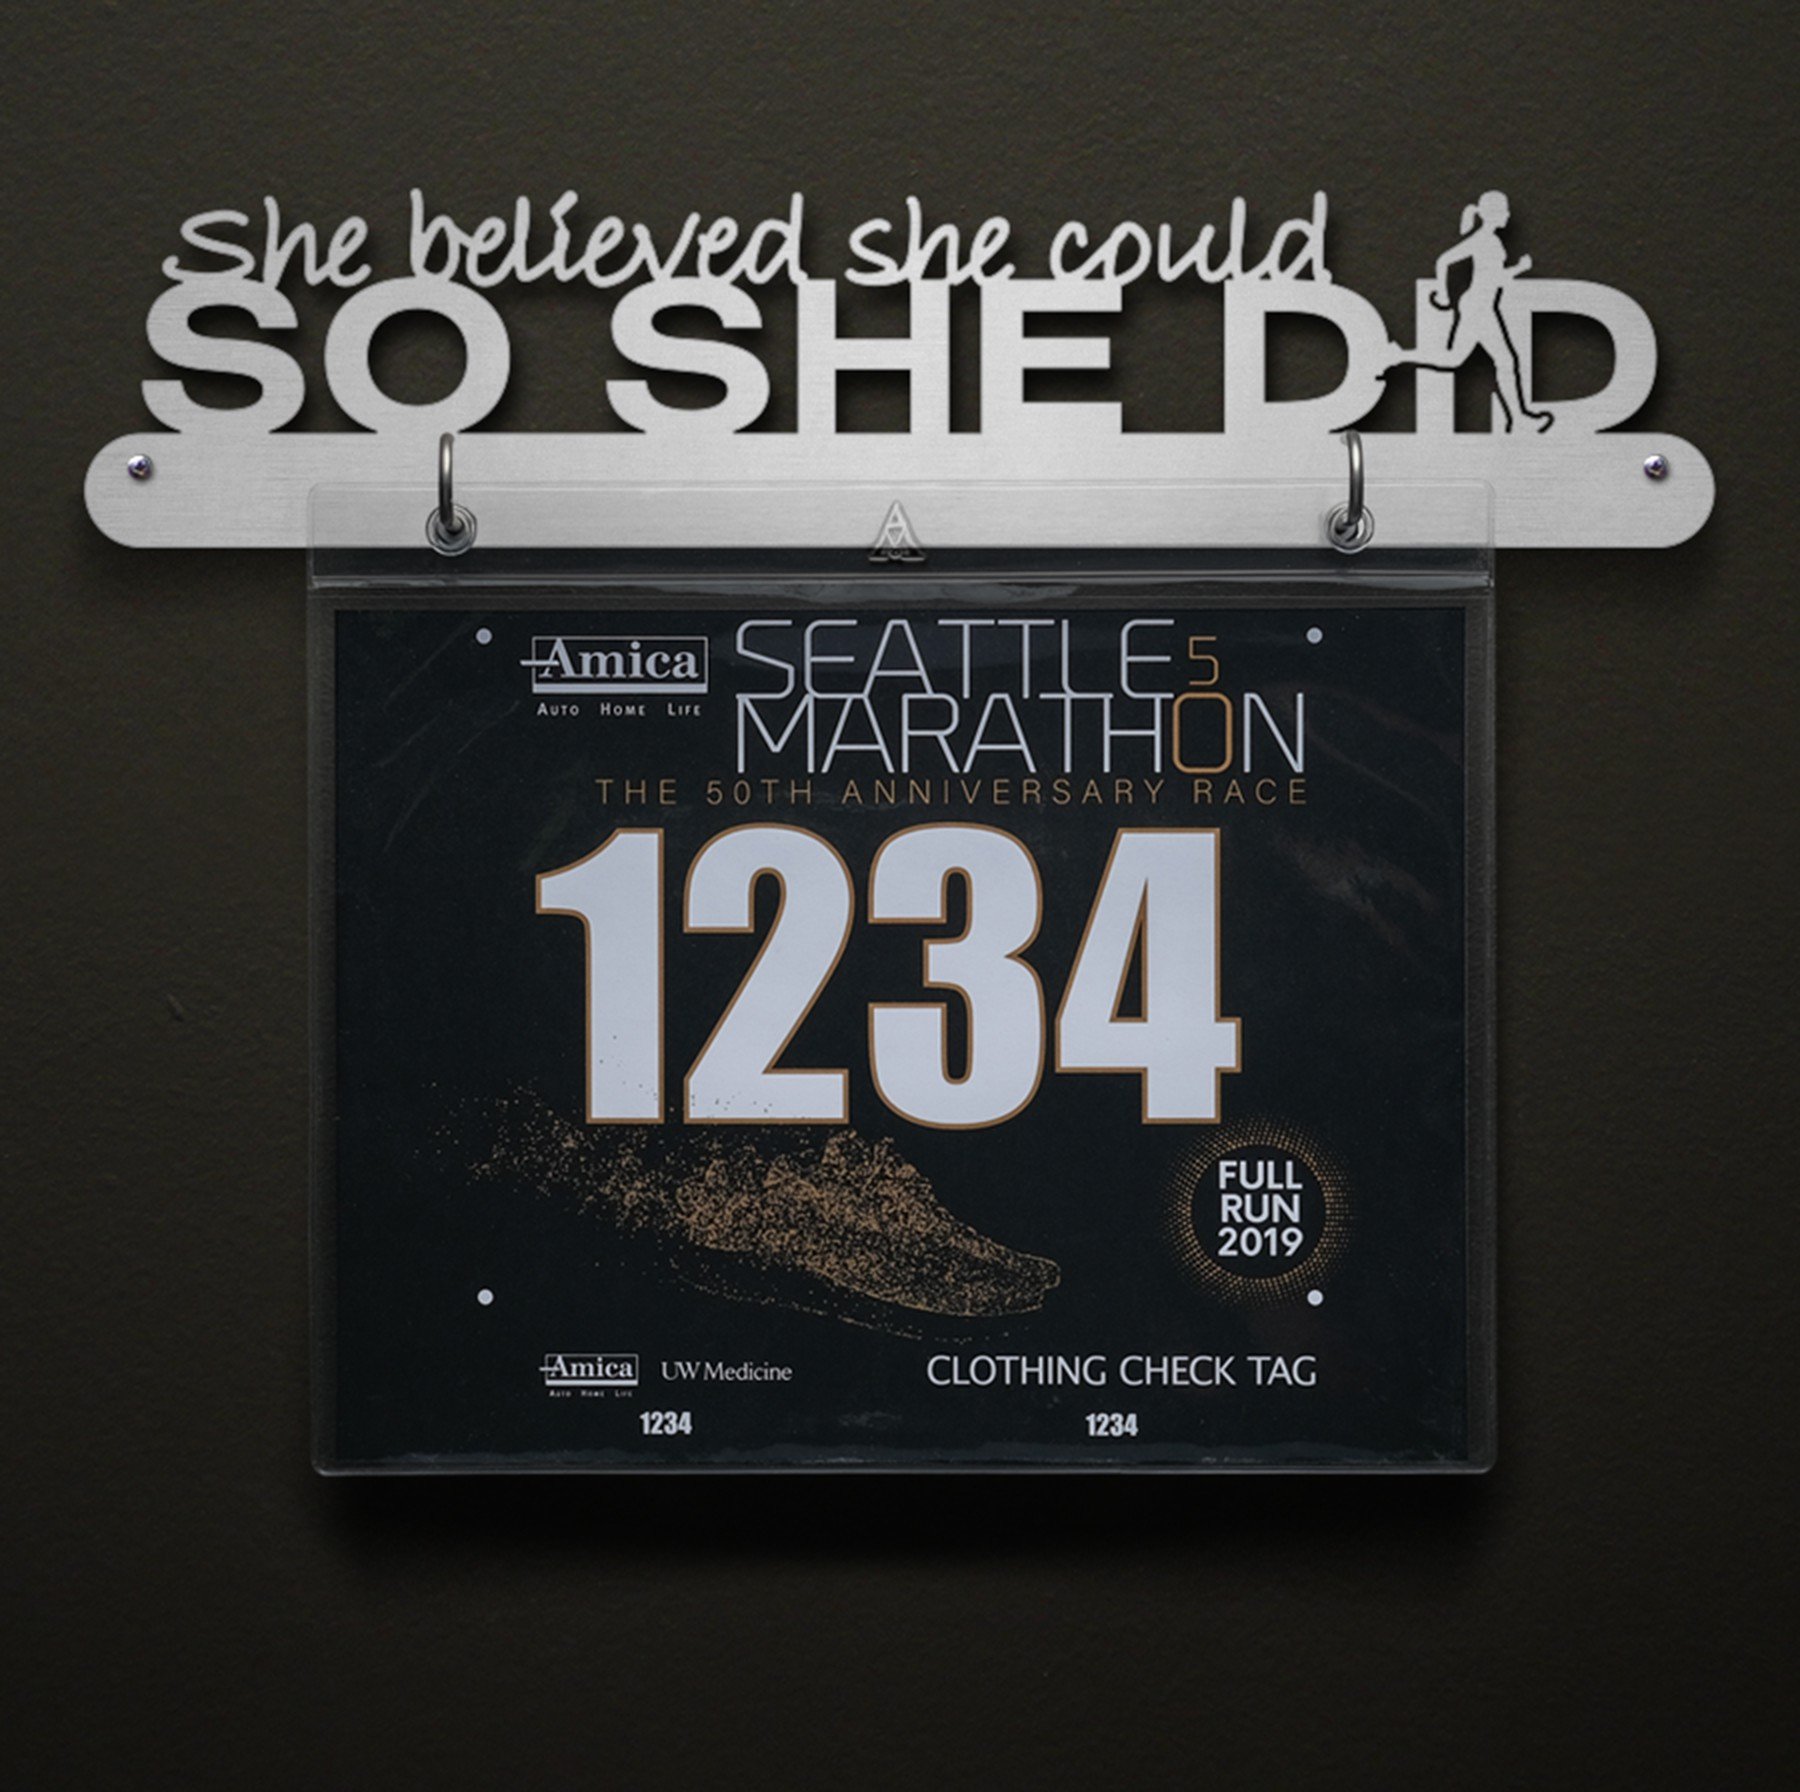 She Believed She Could, So She Did Bib Display - with runner figure